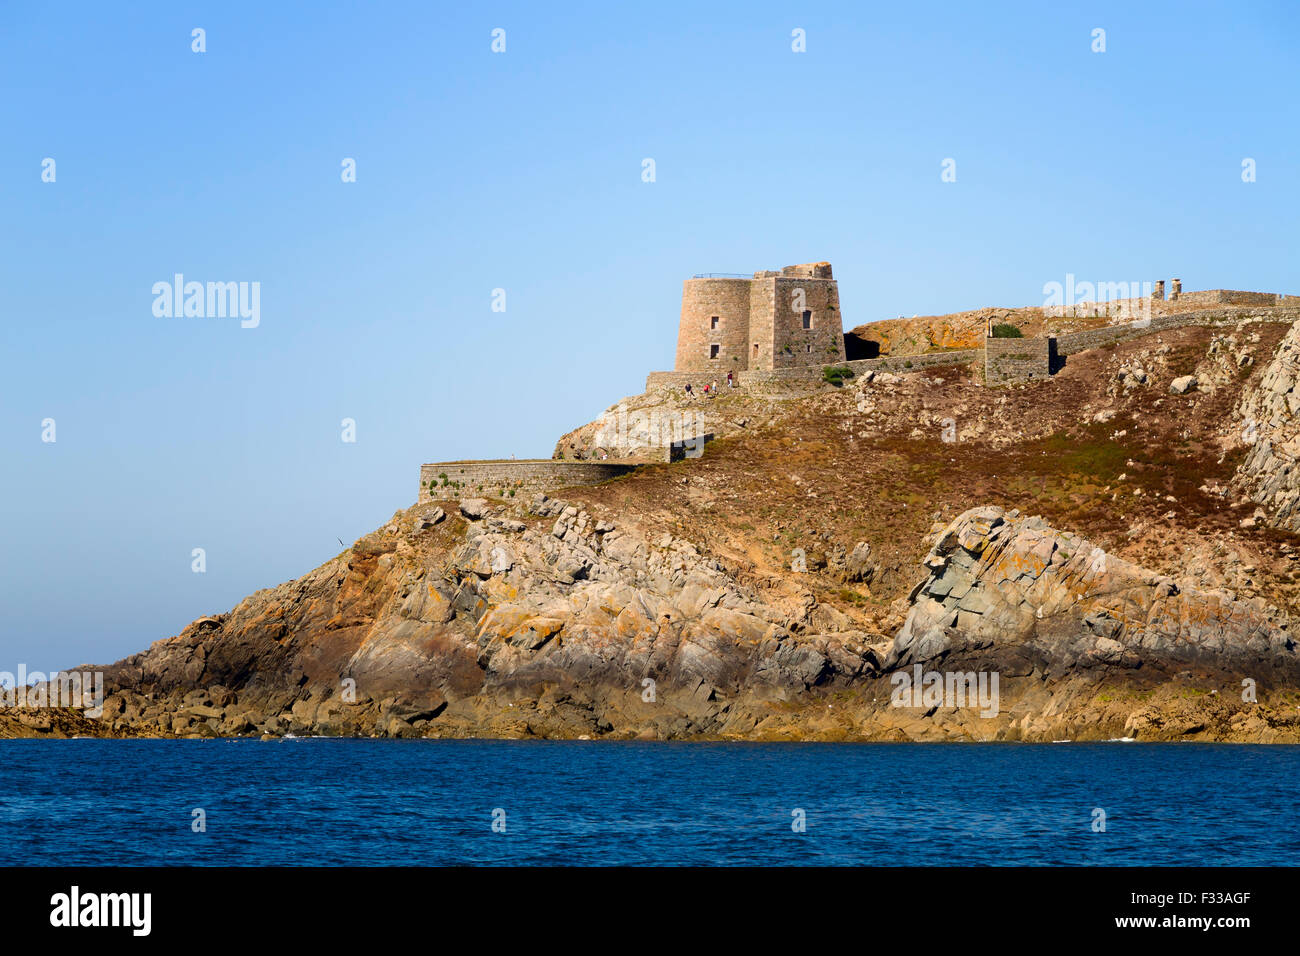 The fort in Moines Island, Ile aux Moines, Sept-Iles archipelago, Cotes d'Armor, Brittany, France. Stock Photo